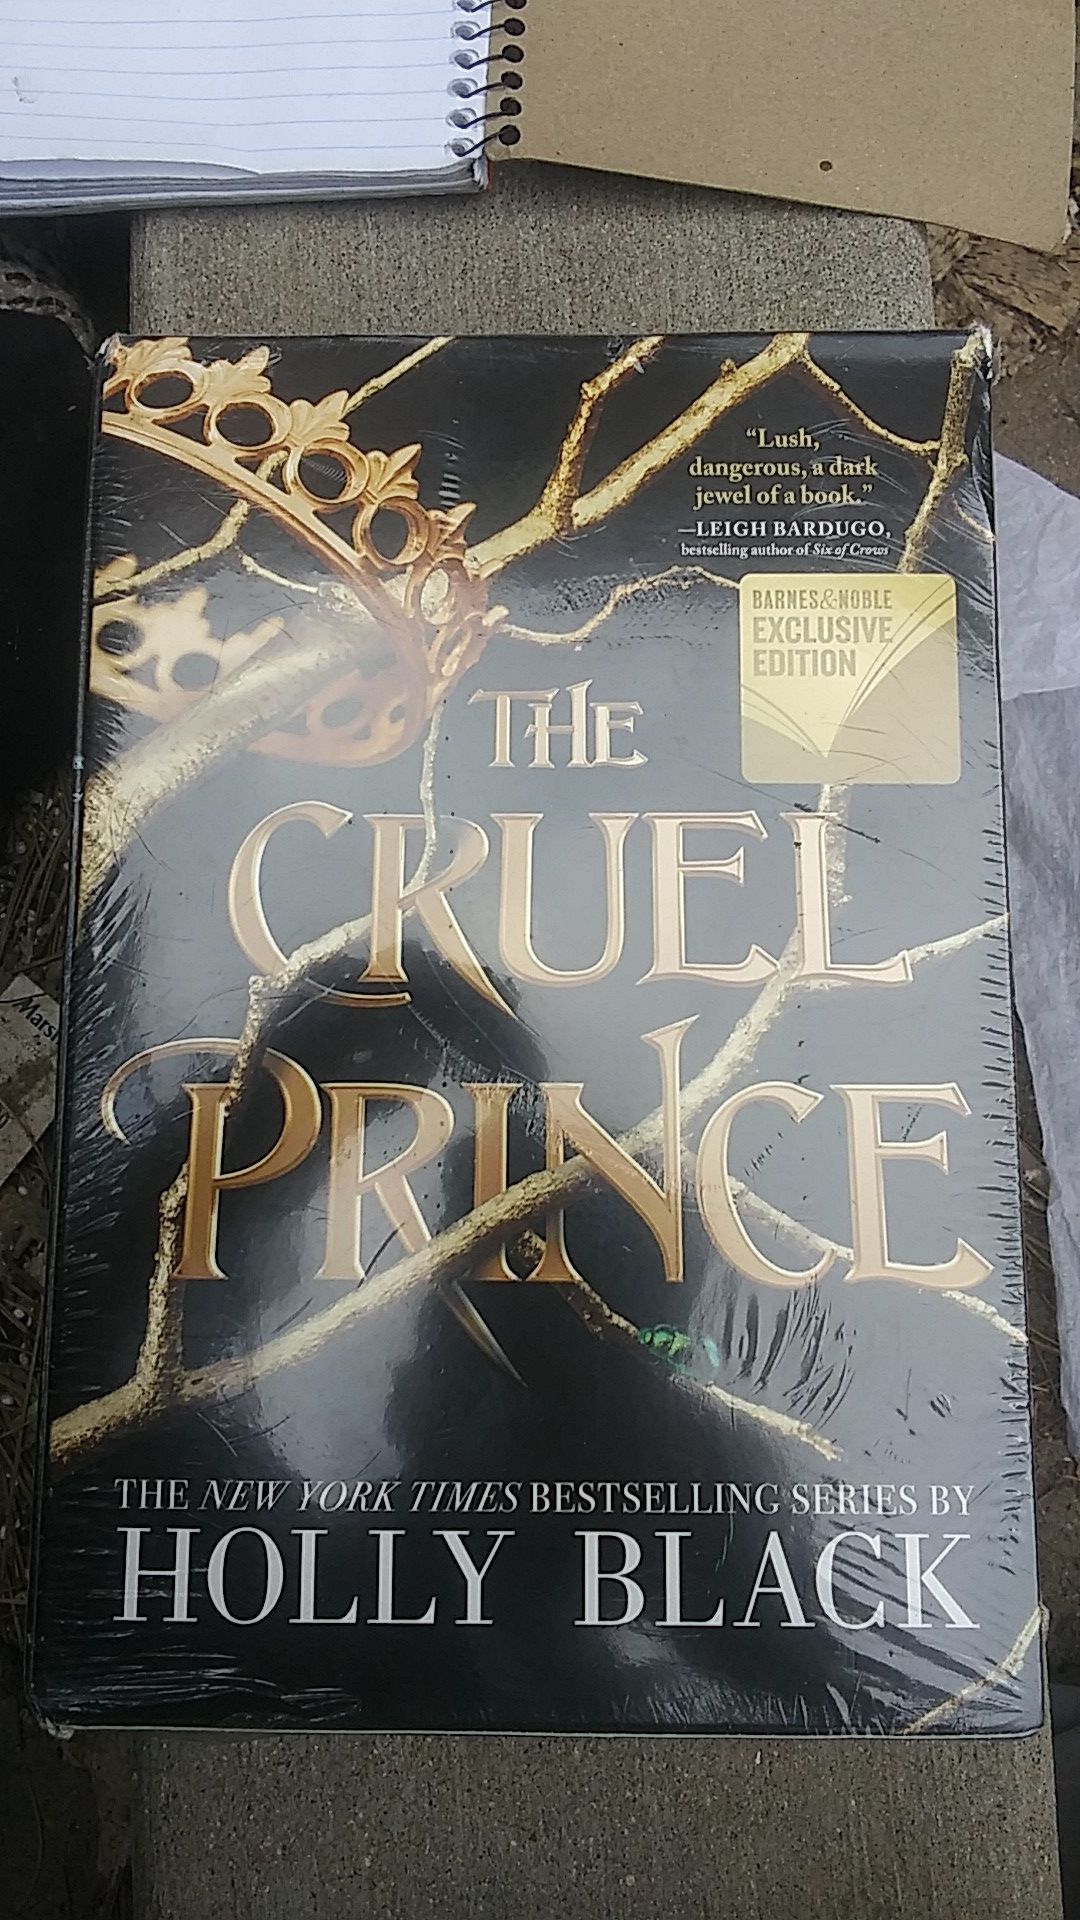 The cruel prince ,Holly black book set. Three books also includes the wicked king and the queen of nothing